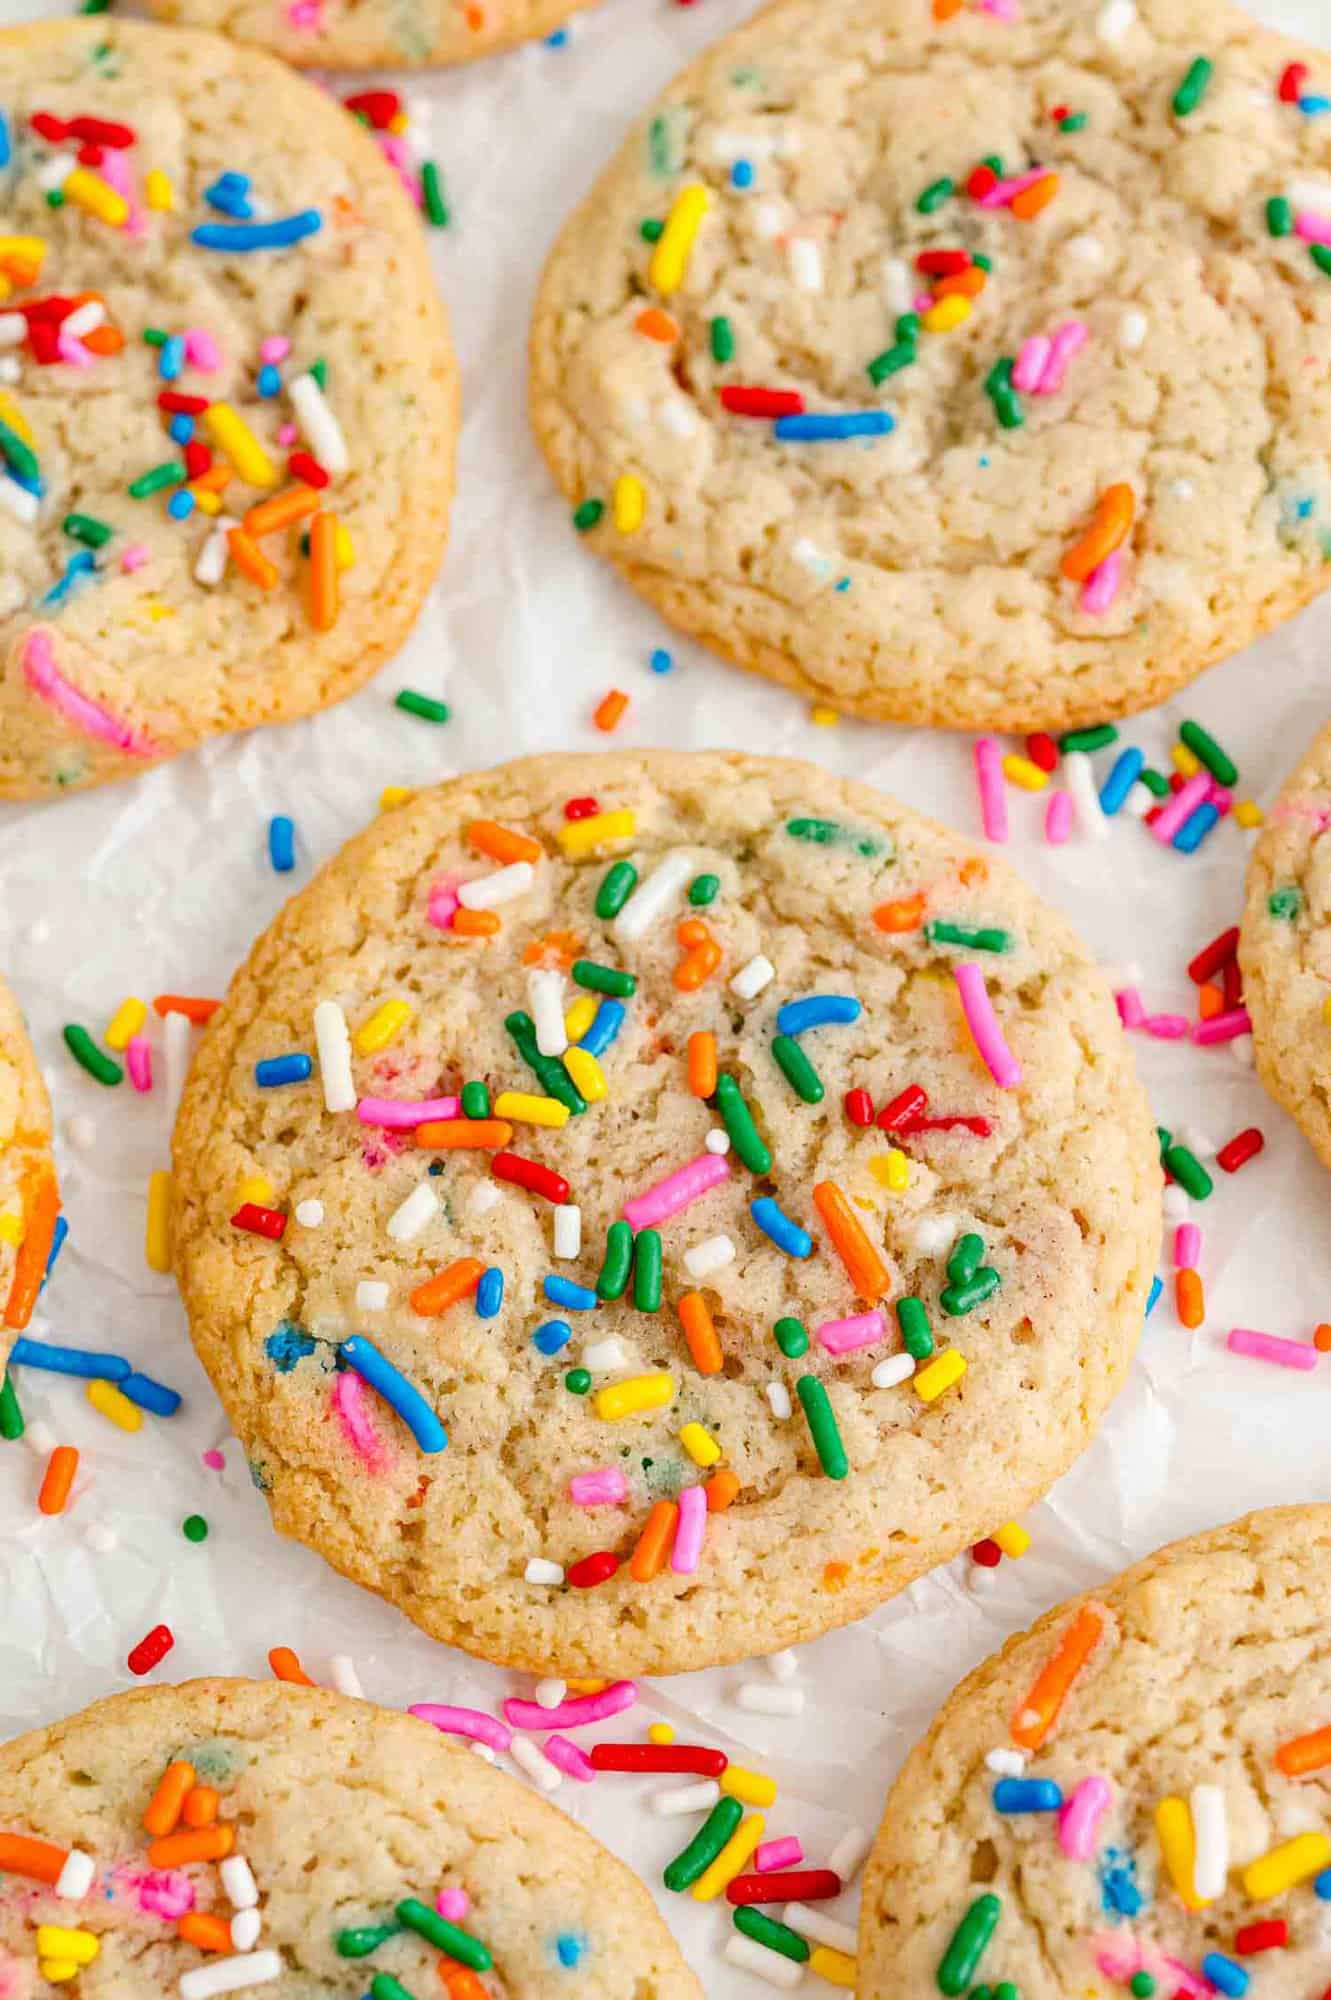 Funfetti cookies on a white surface, sprinkled with additional jimmies.